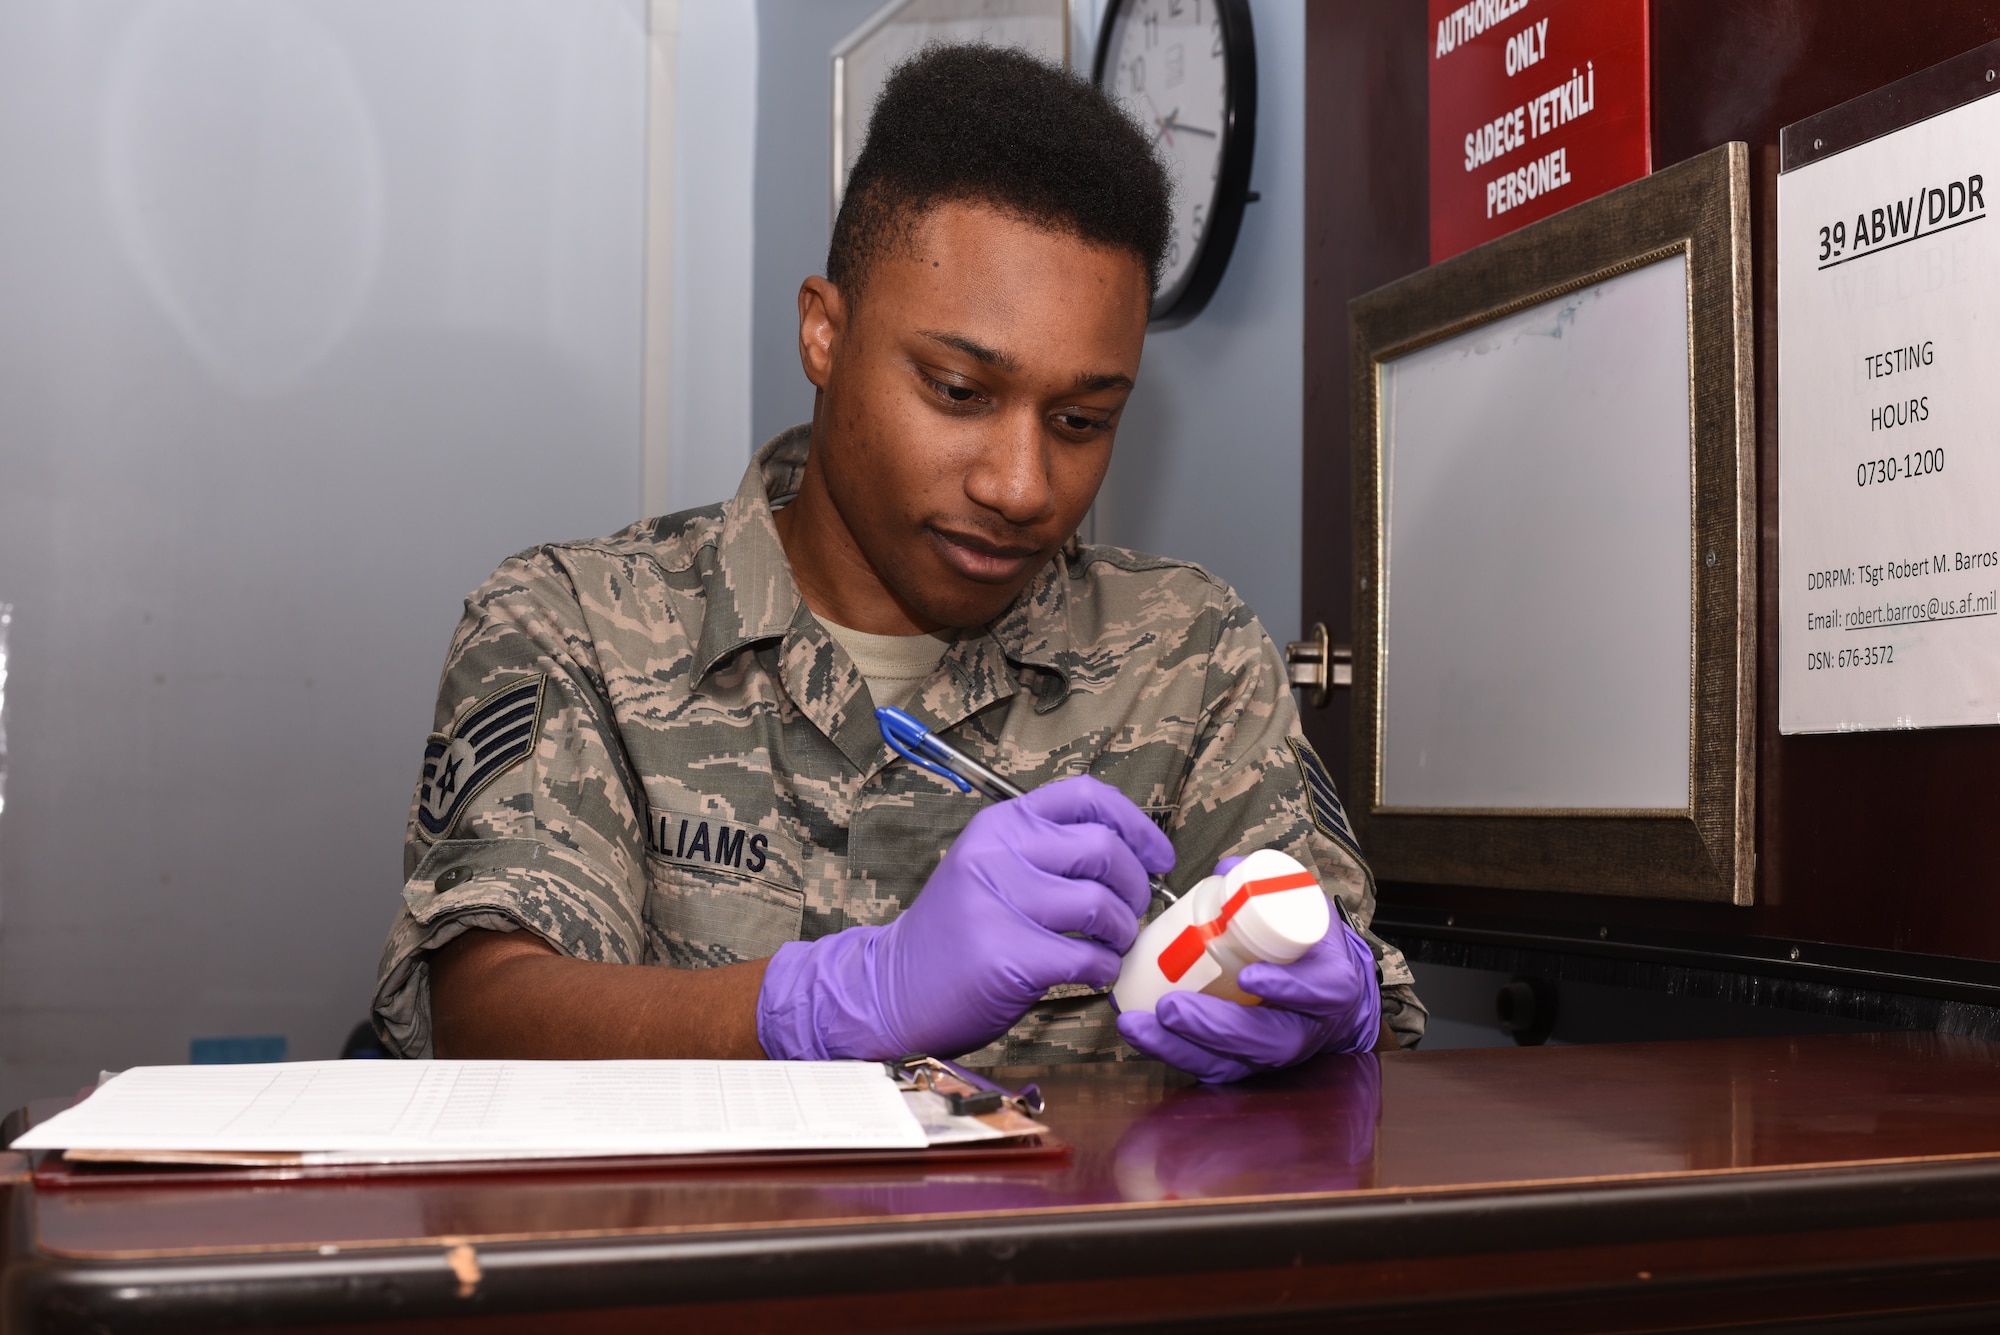 Staff Sgt. Tyler Williams, 39th Air Base Wing drug program administrative manager, documents a sample for the Drug Demand Reduction Program March 14, 2019, at Incirlik Air Base, Turkey.